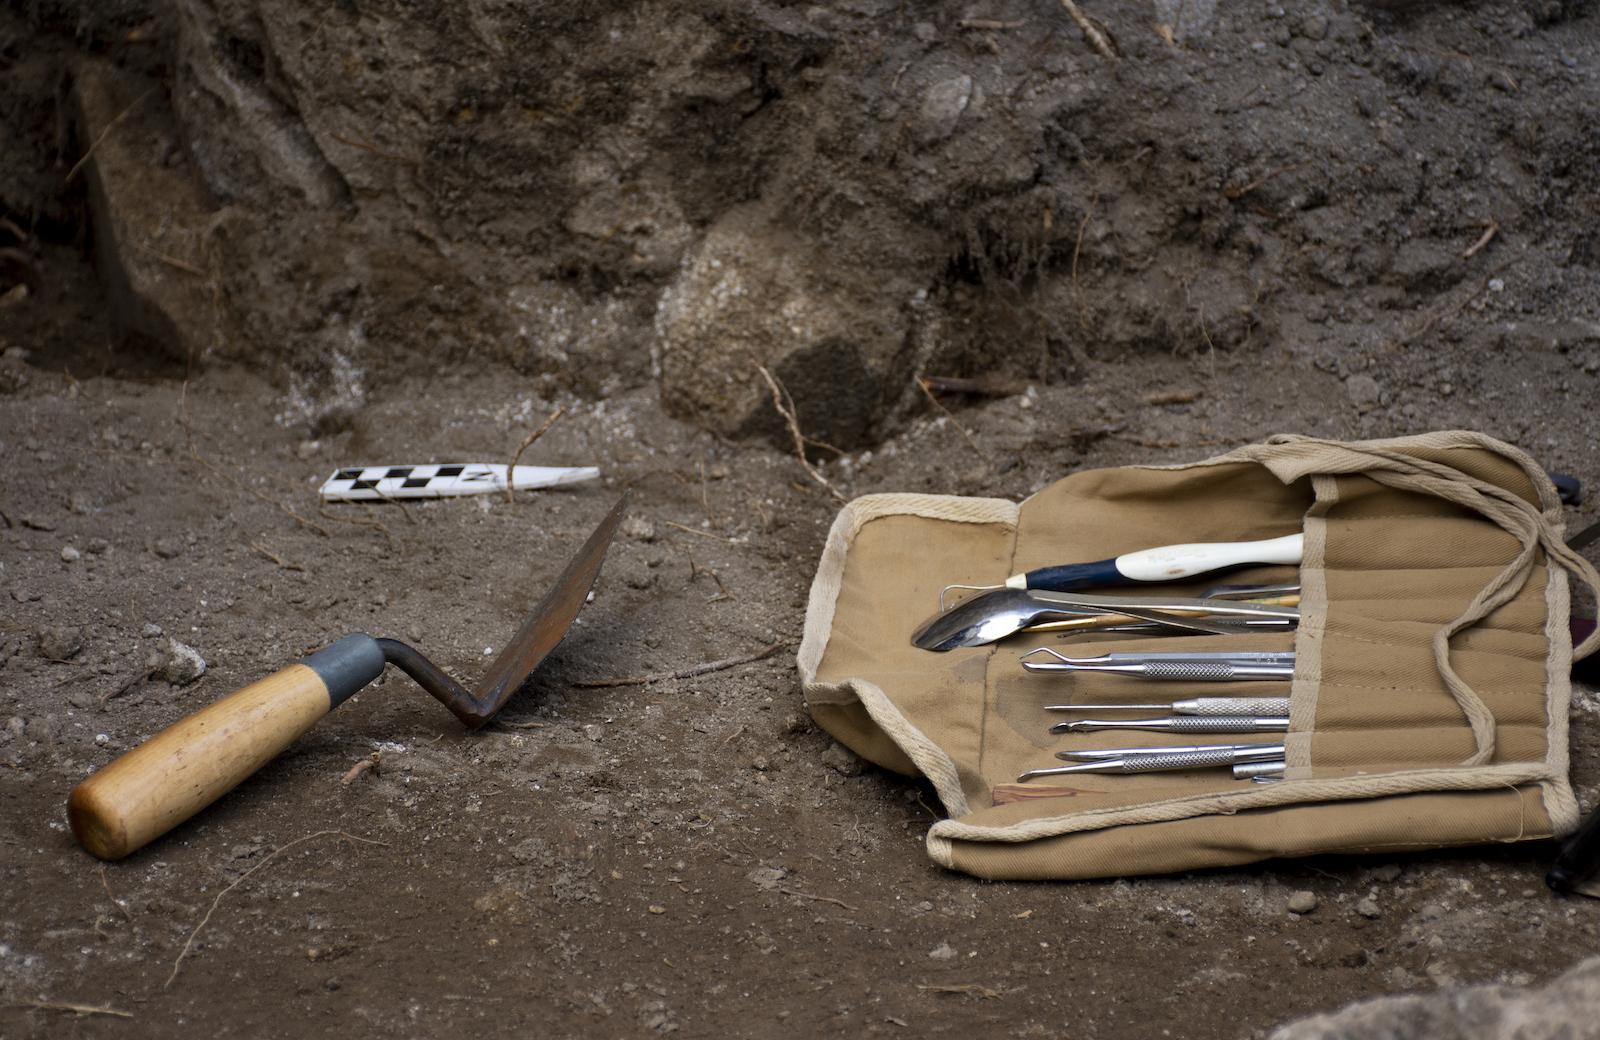 Archaeologists are most famously known for using trowels (left), however, some of their work requires finer and more delicate tools as can be seen here on the right.